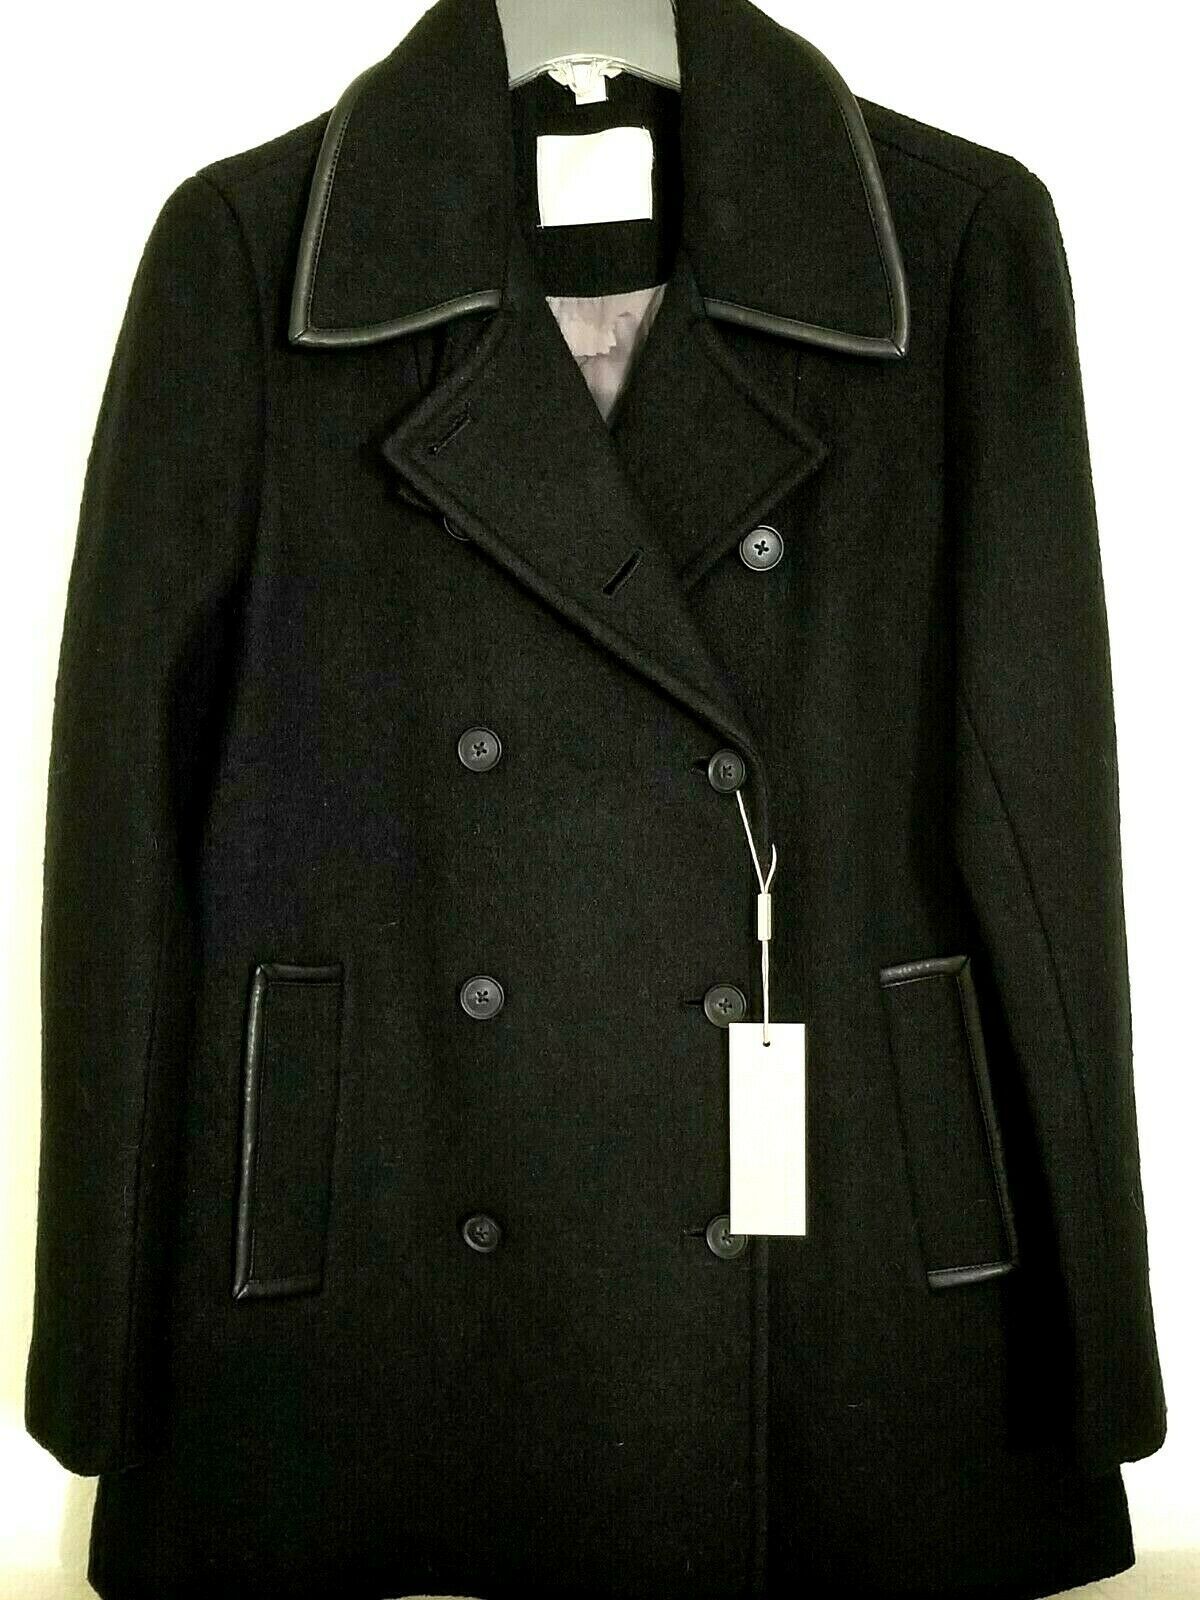 Primary image for SOIA & KYO EMMIE BLACK WOOL COAT LAMBSKIN LEATHER TRIM SZ LNWT